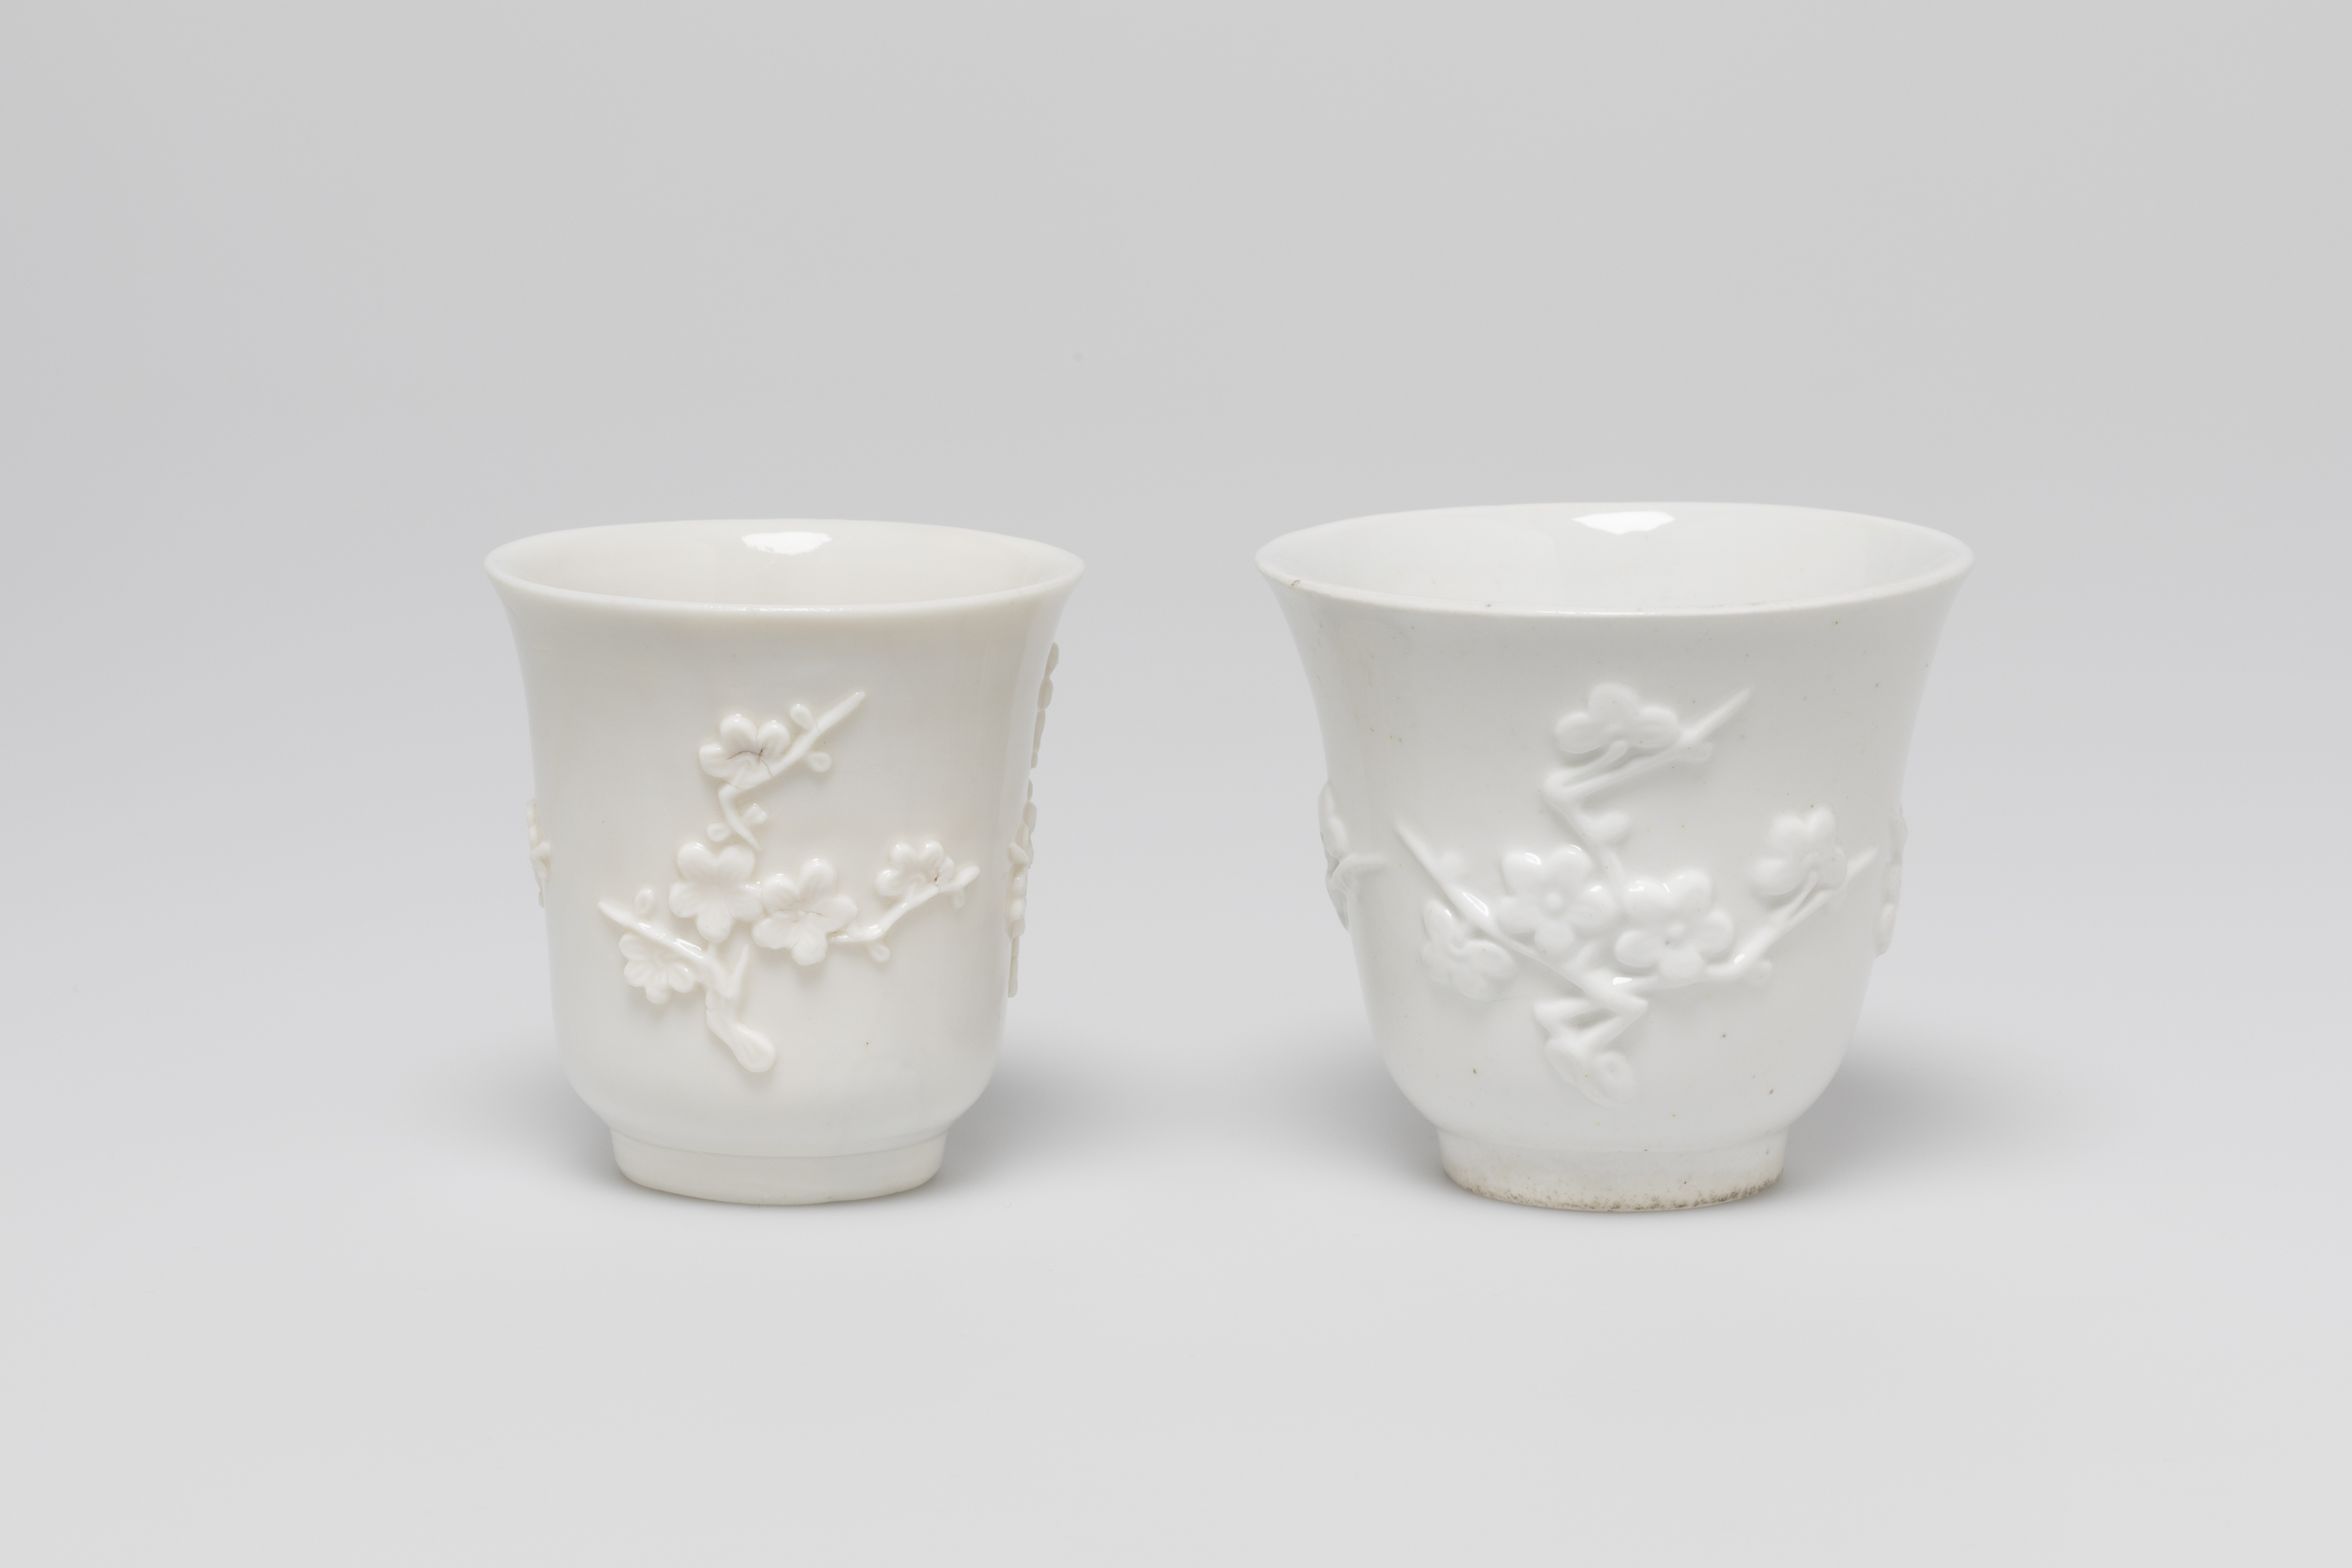 An image of almost identical two white tea cups decorated with blossom blowers in relief.